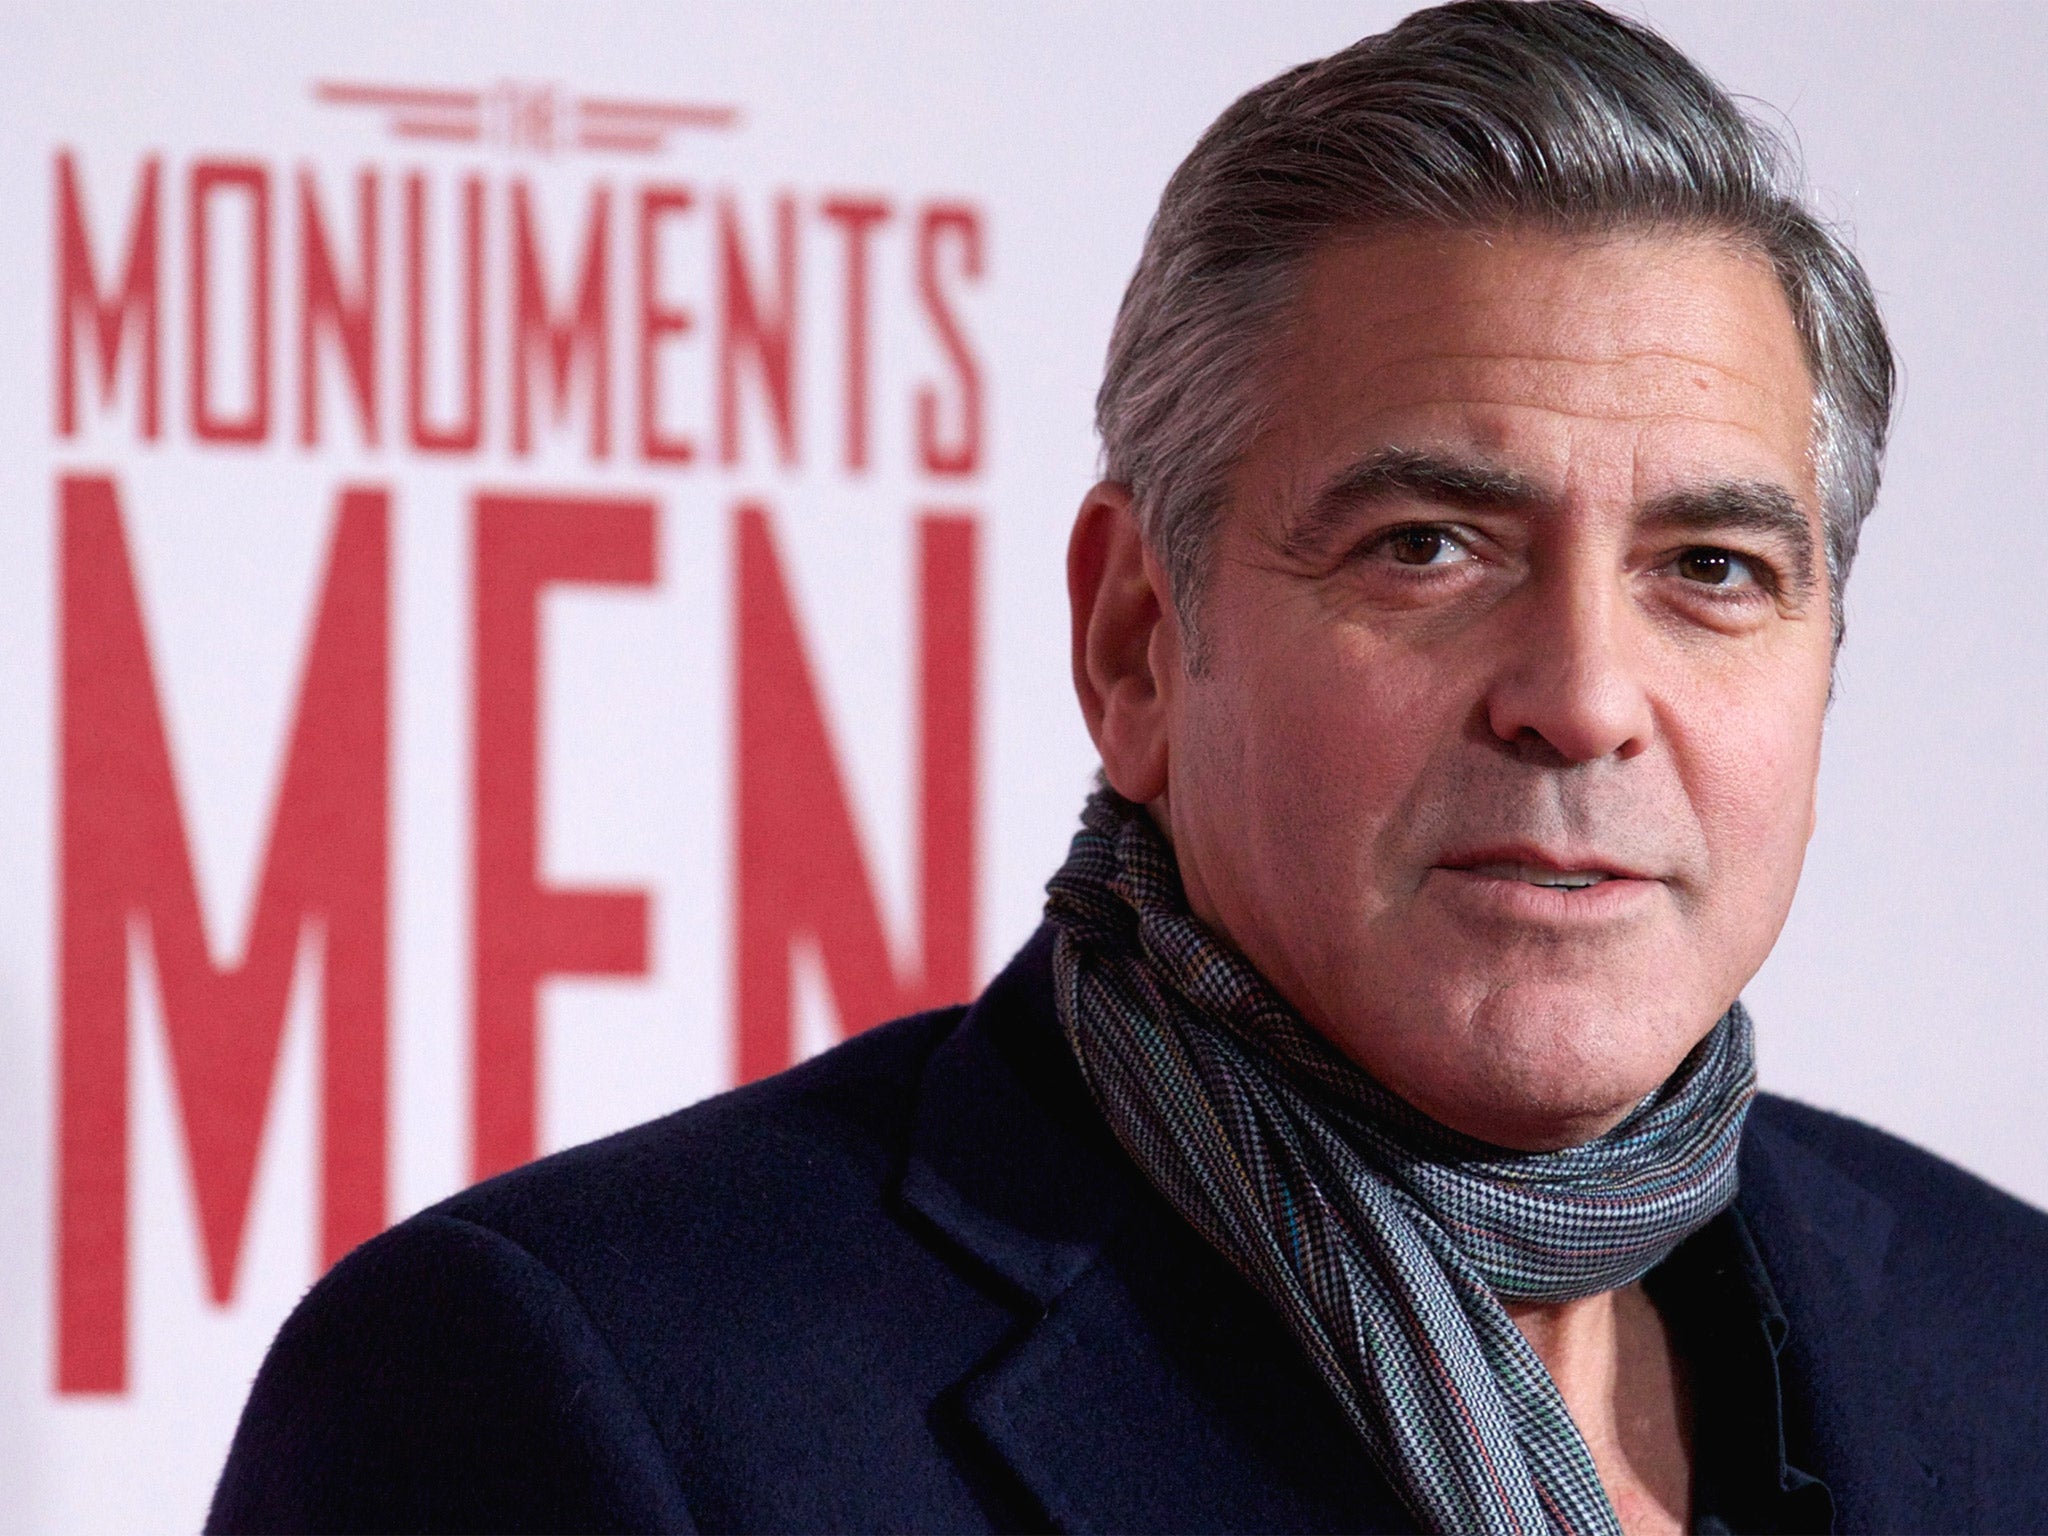 George Clooney at the UK premiere of the film 'The Monuments Men' in London